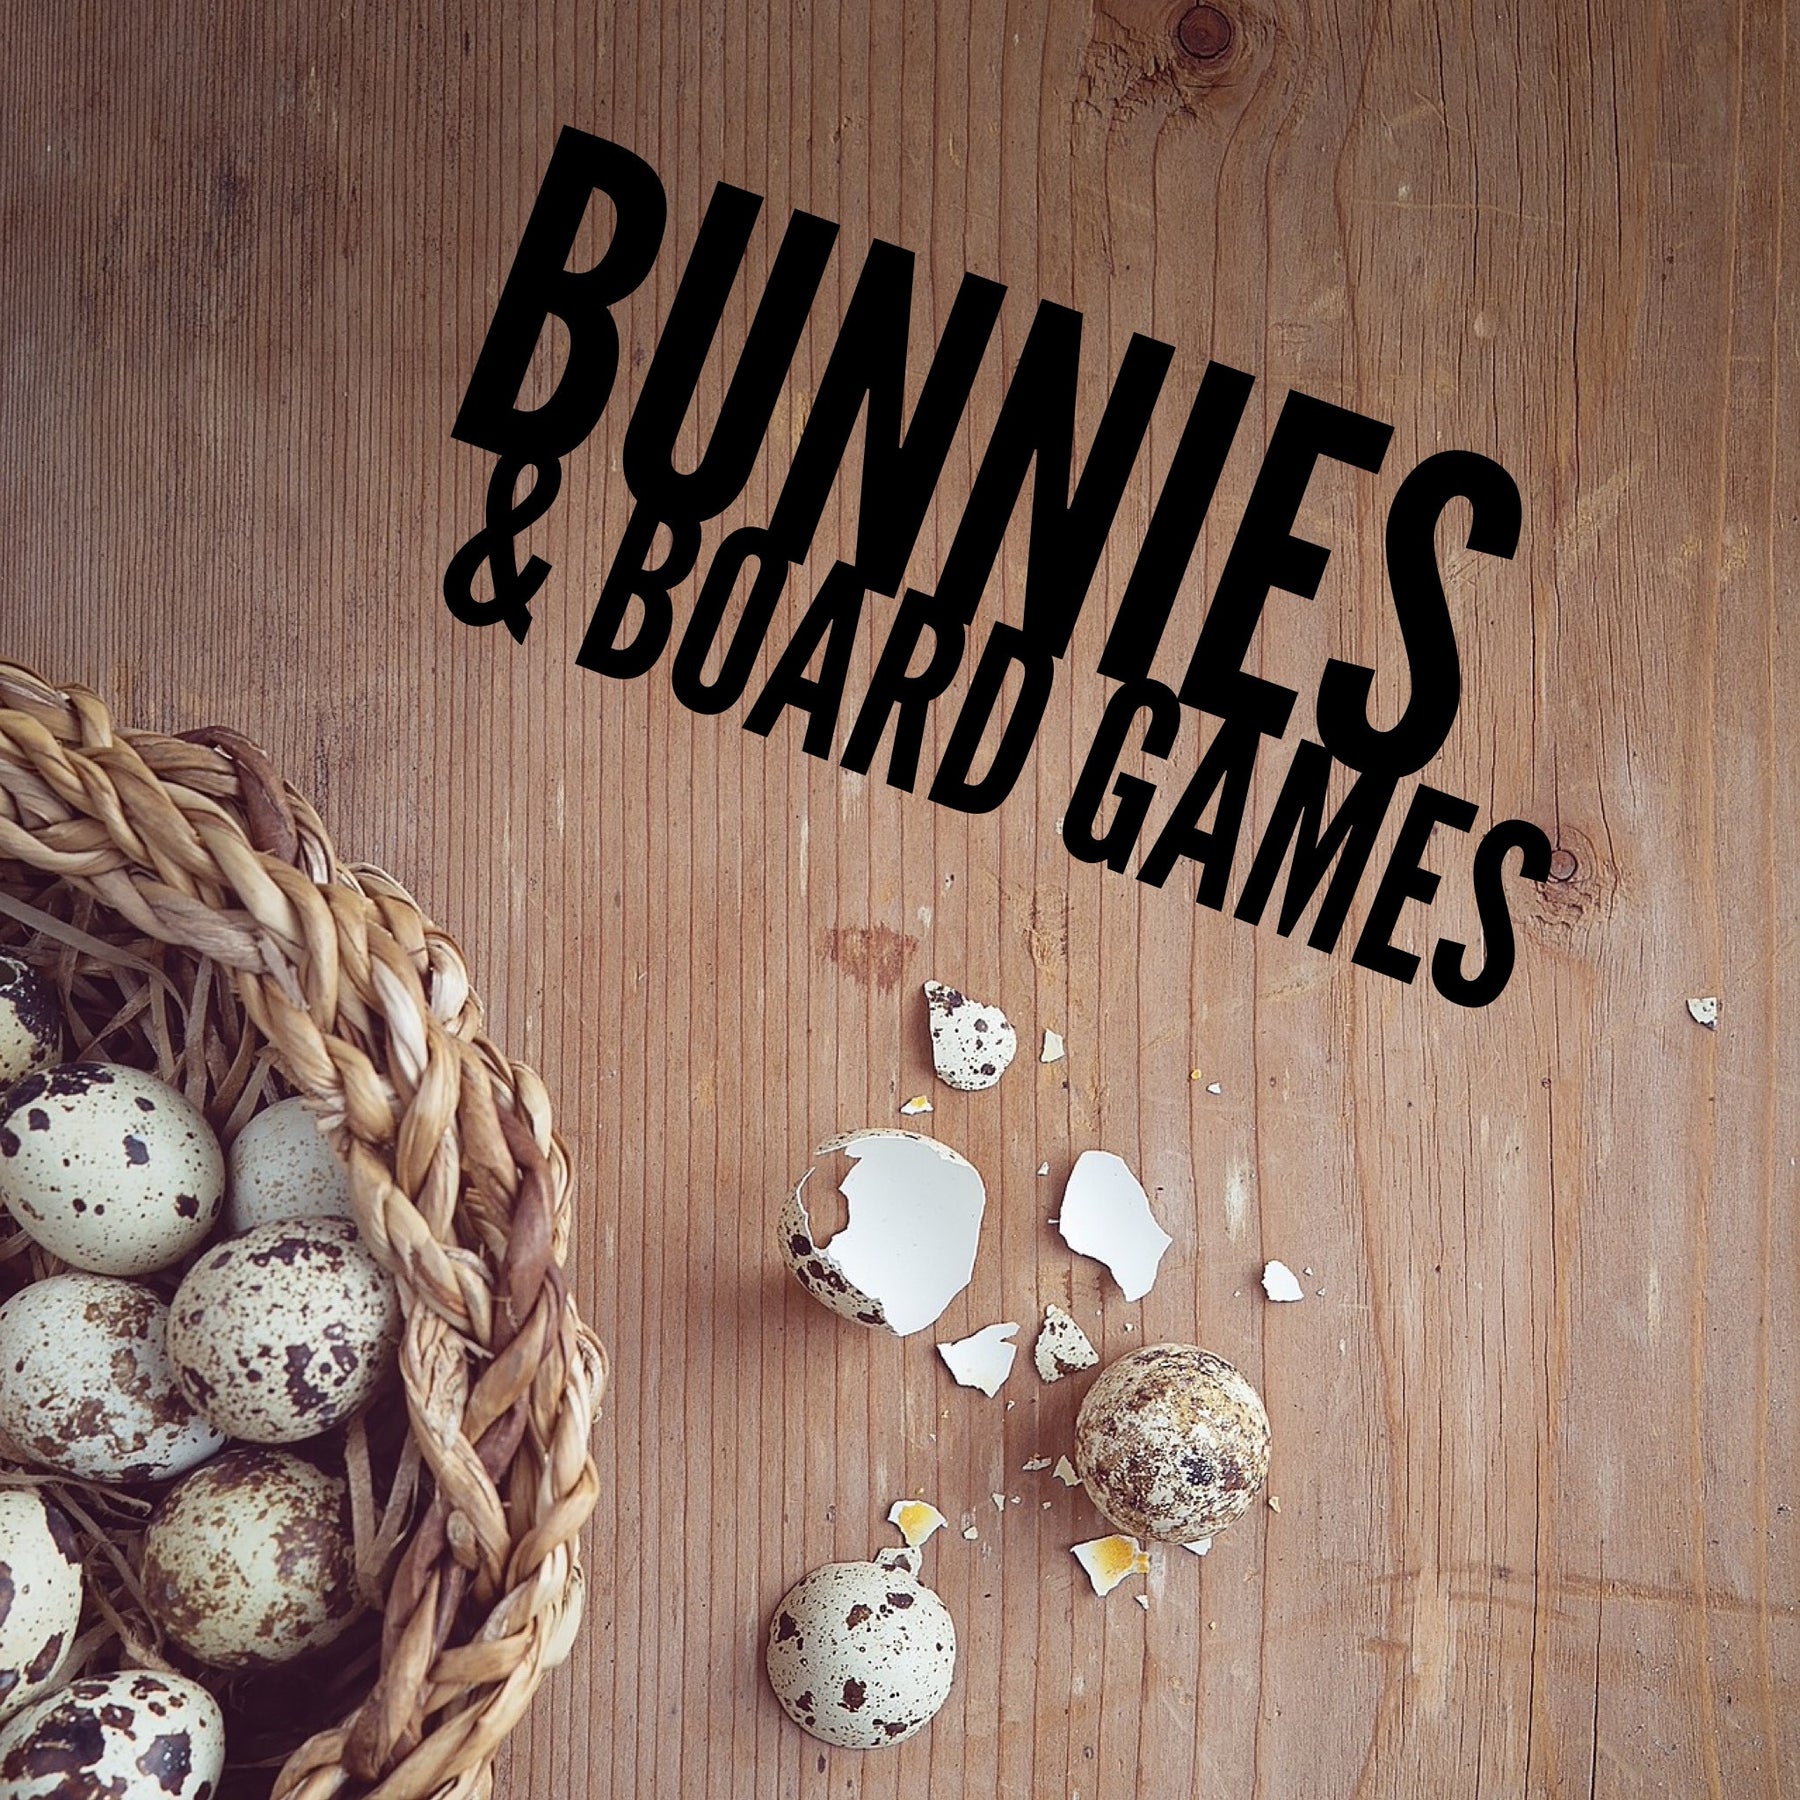 Bunnies & Board Games: Easter Edition!